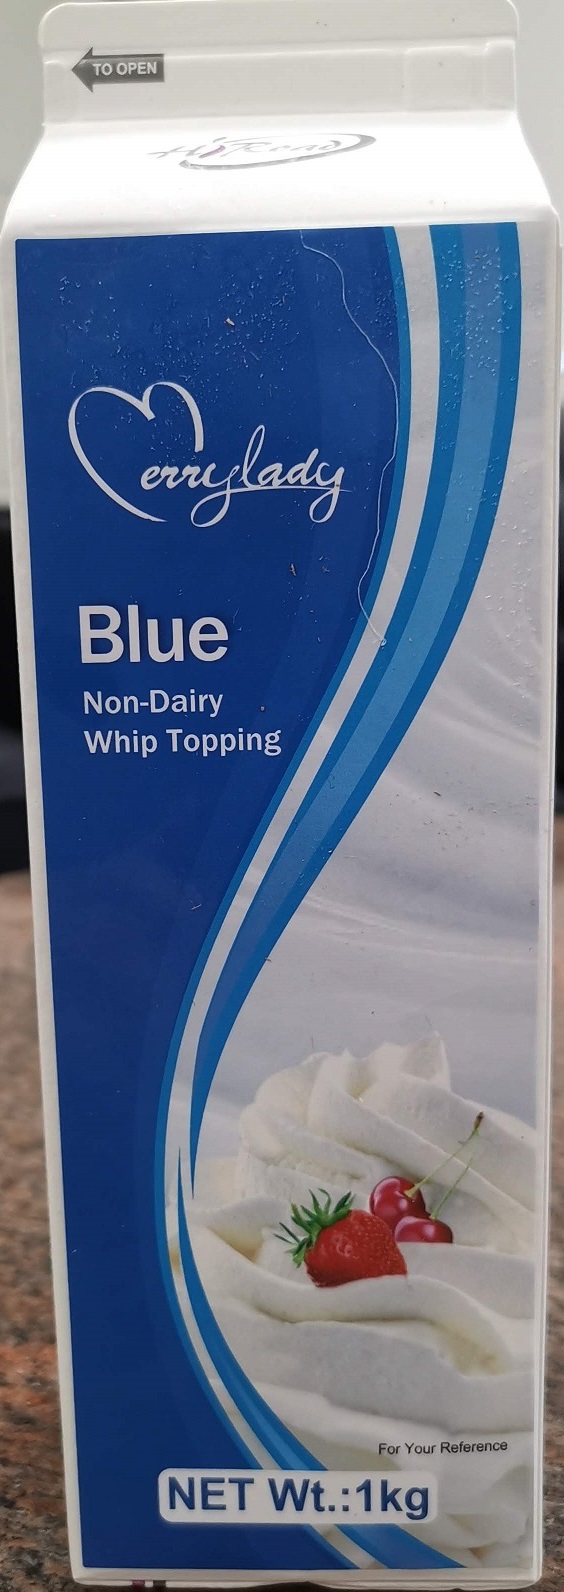 Merrylady – Non-Dairy Blue Whip Topping – 1 kg (front)